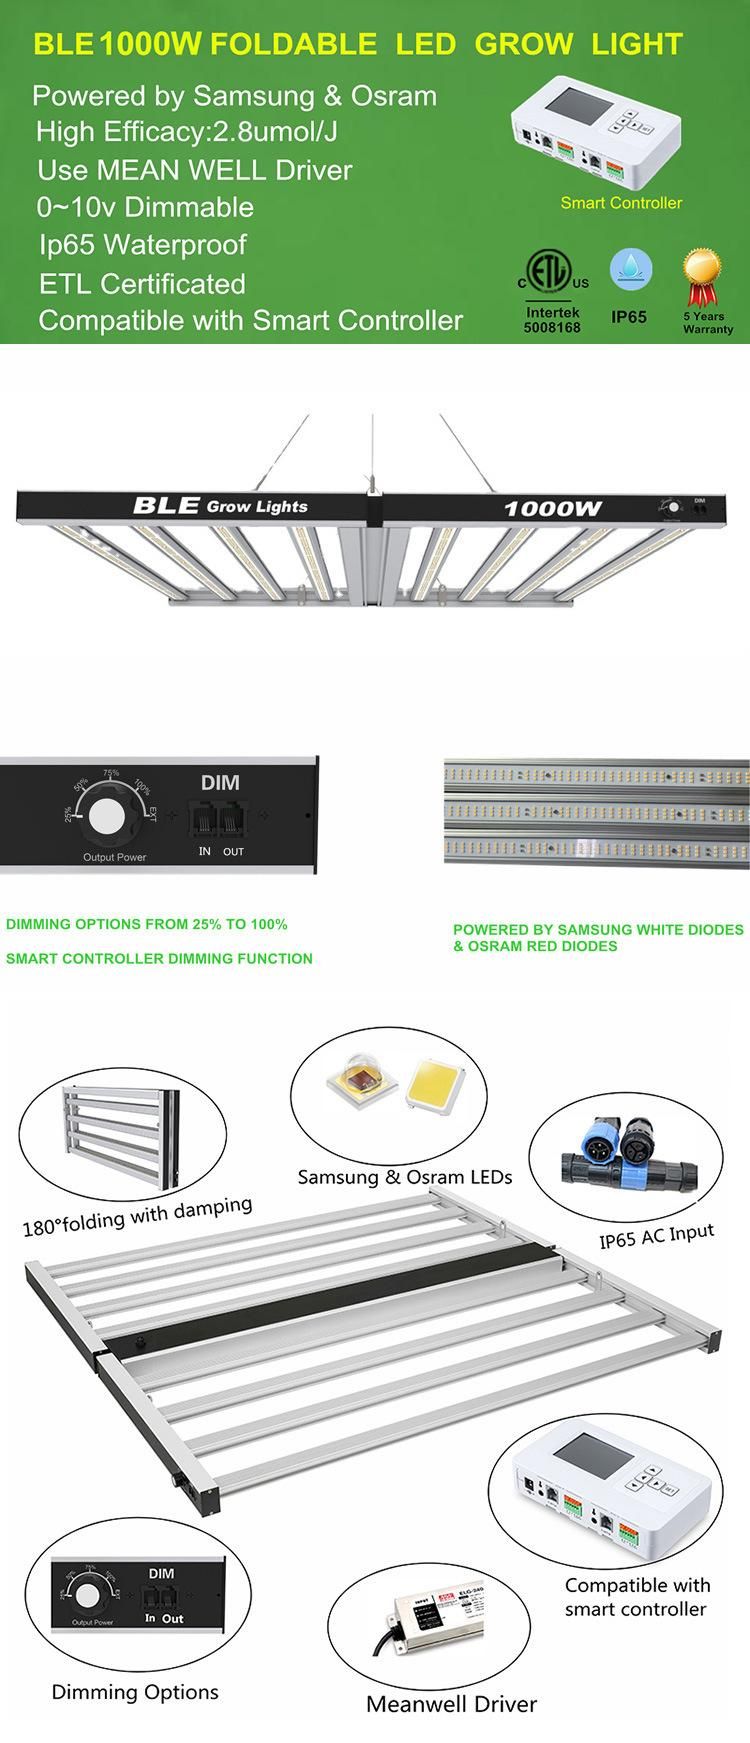 Ppf 2.8 Samsung LED Grow Light Full Spectrum Lm301b ETL Horticulture IP65 660W 800W 1000W Commercial Vertical Indoor Grow